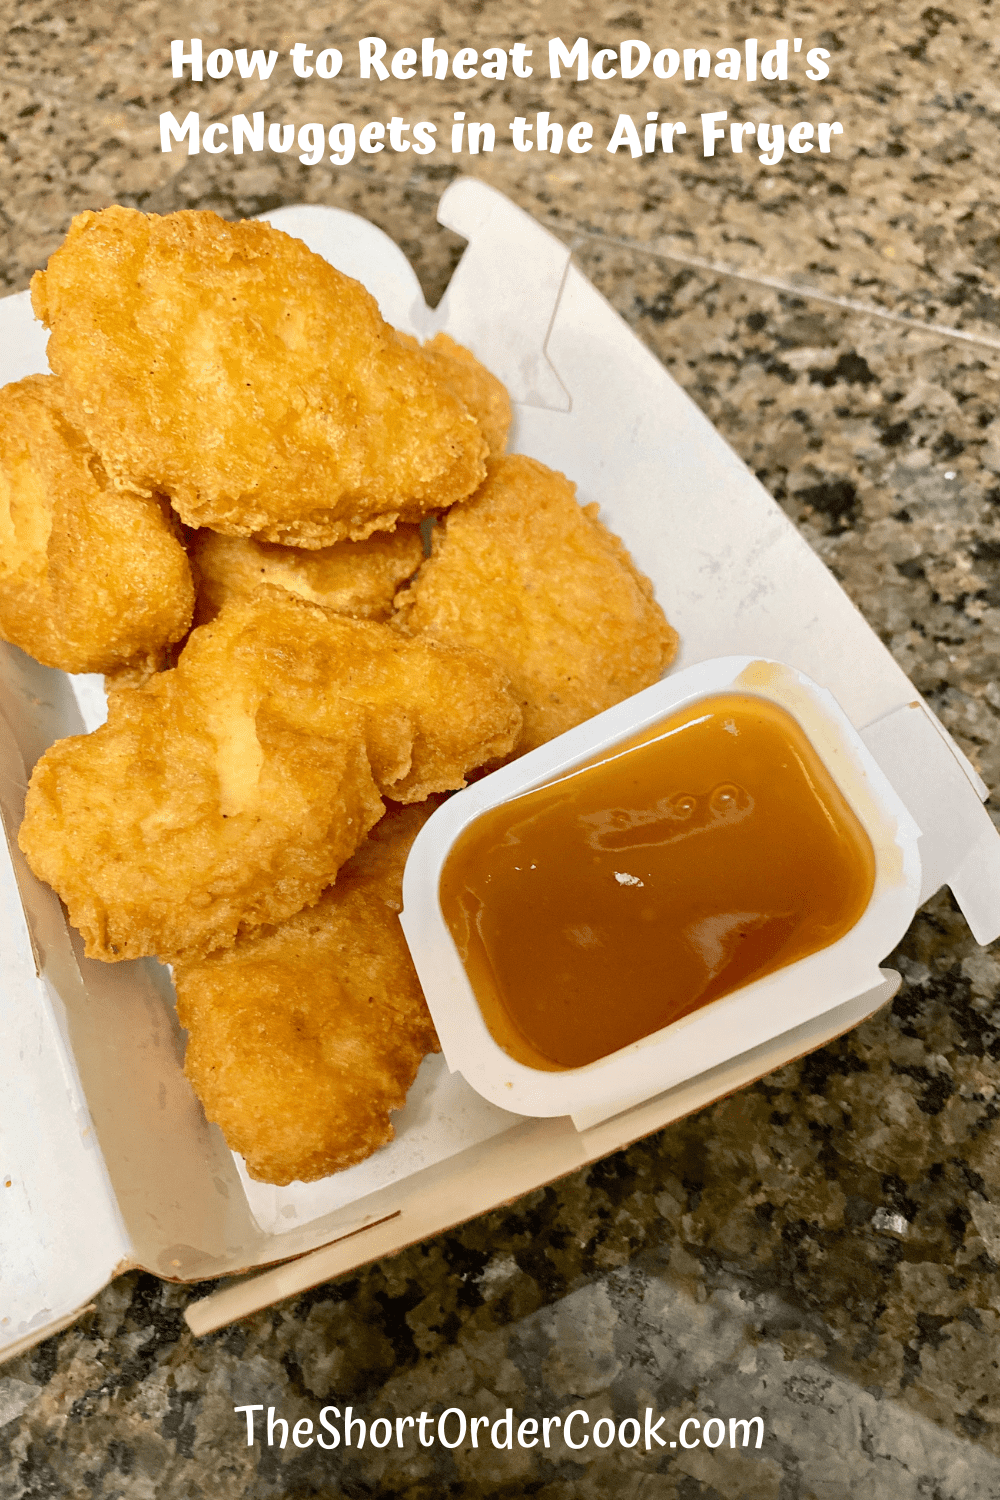 How to Reheat McDonald's Nuggets: Quick & Tasty Tips!